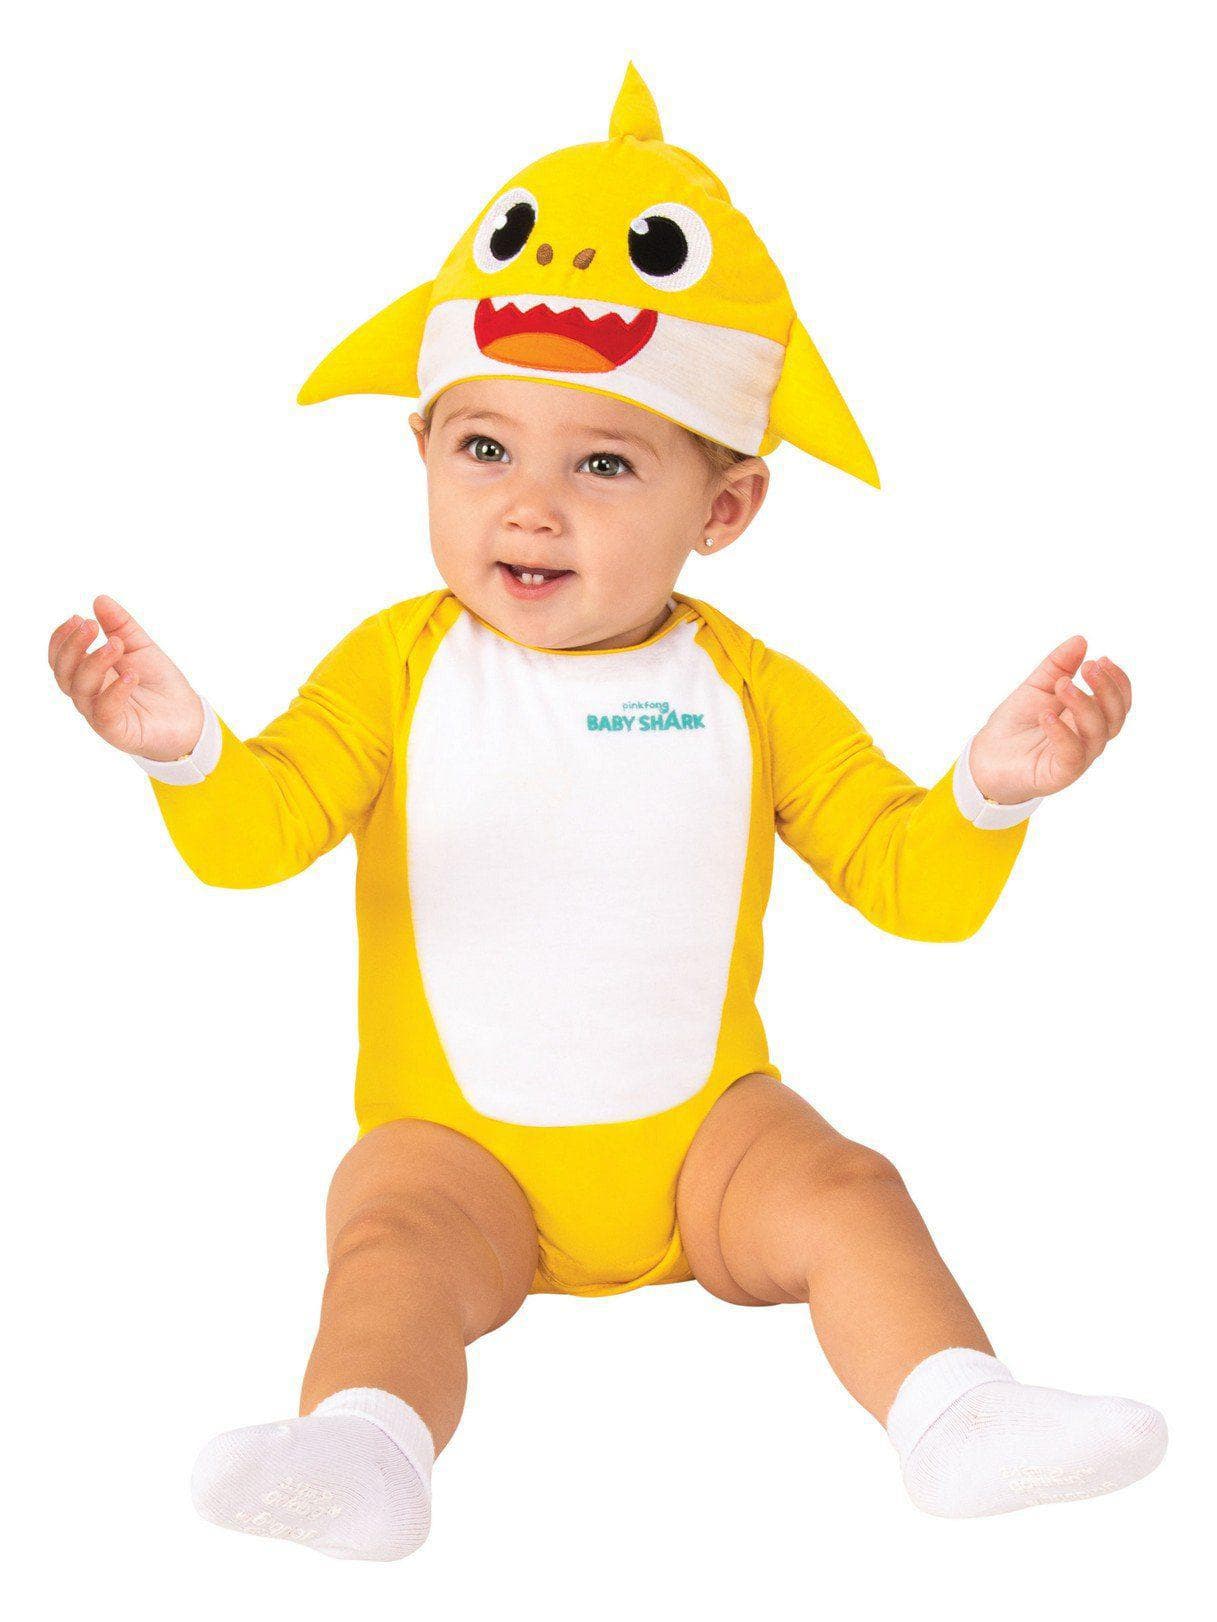 Baby Shark Romper and Headpiece for Babies - costumes.com